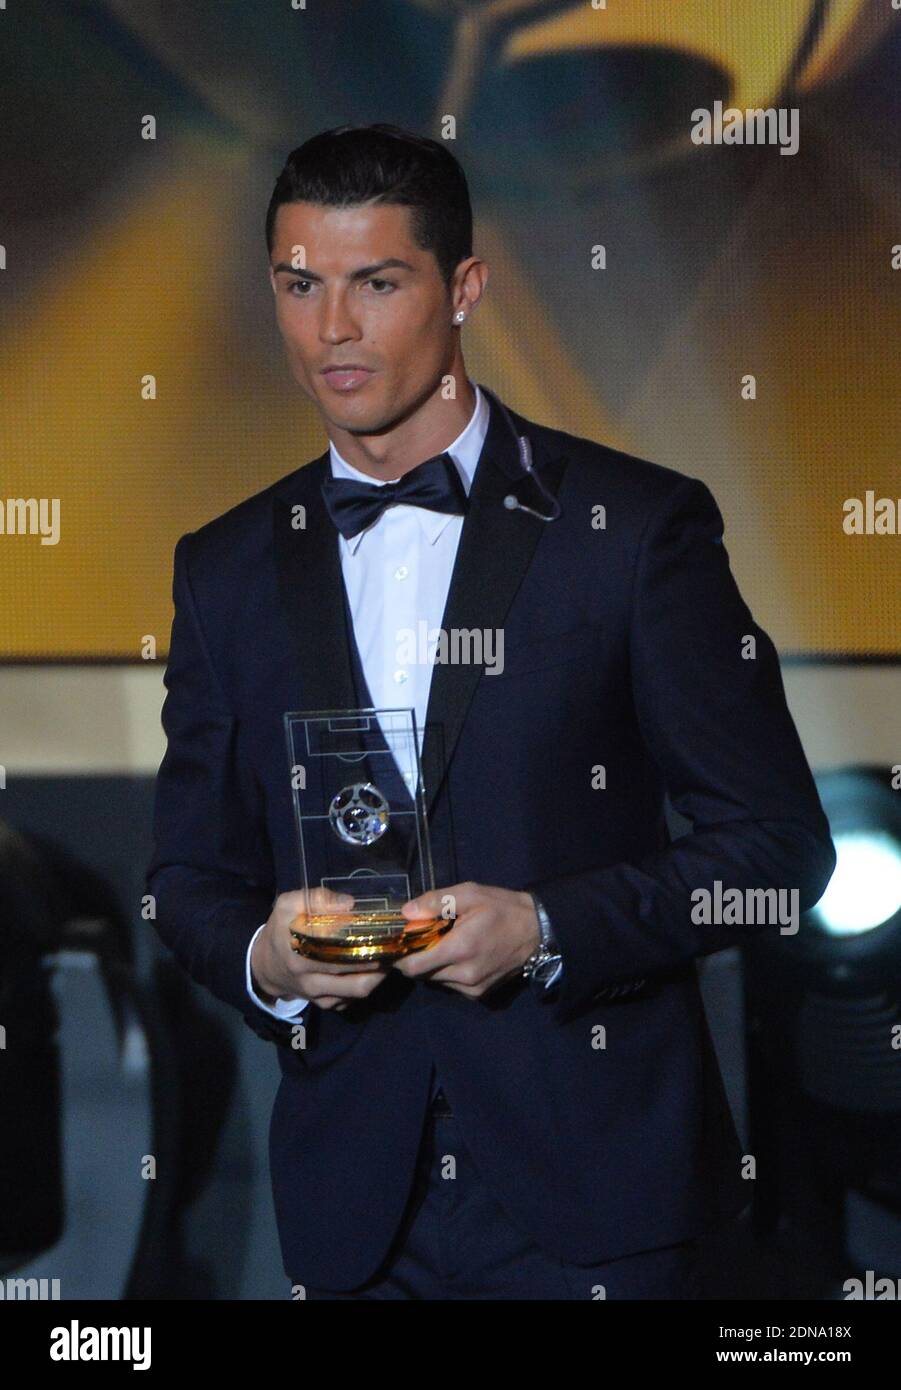 Portugal's Cristiano Ronaldo during the FIFA Ballon D'Or 2014 Award Gala at  the Kongresshalle in Zurich, Switzerland on January 12, 2015. Photo by  Christian Liewig/ABACAPRESS.COM Stock Photo - Alamy